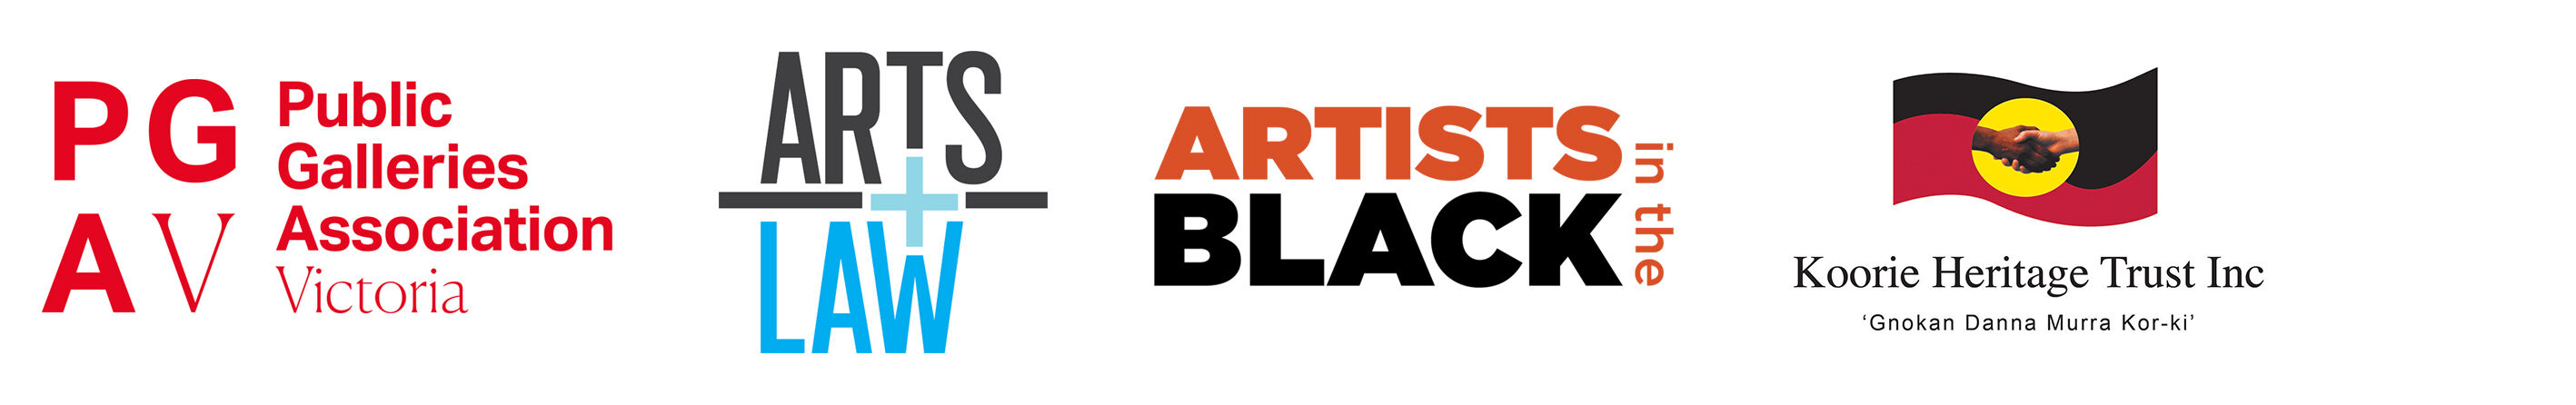 Artists in the Black at KHT